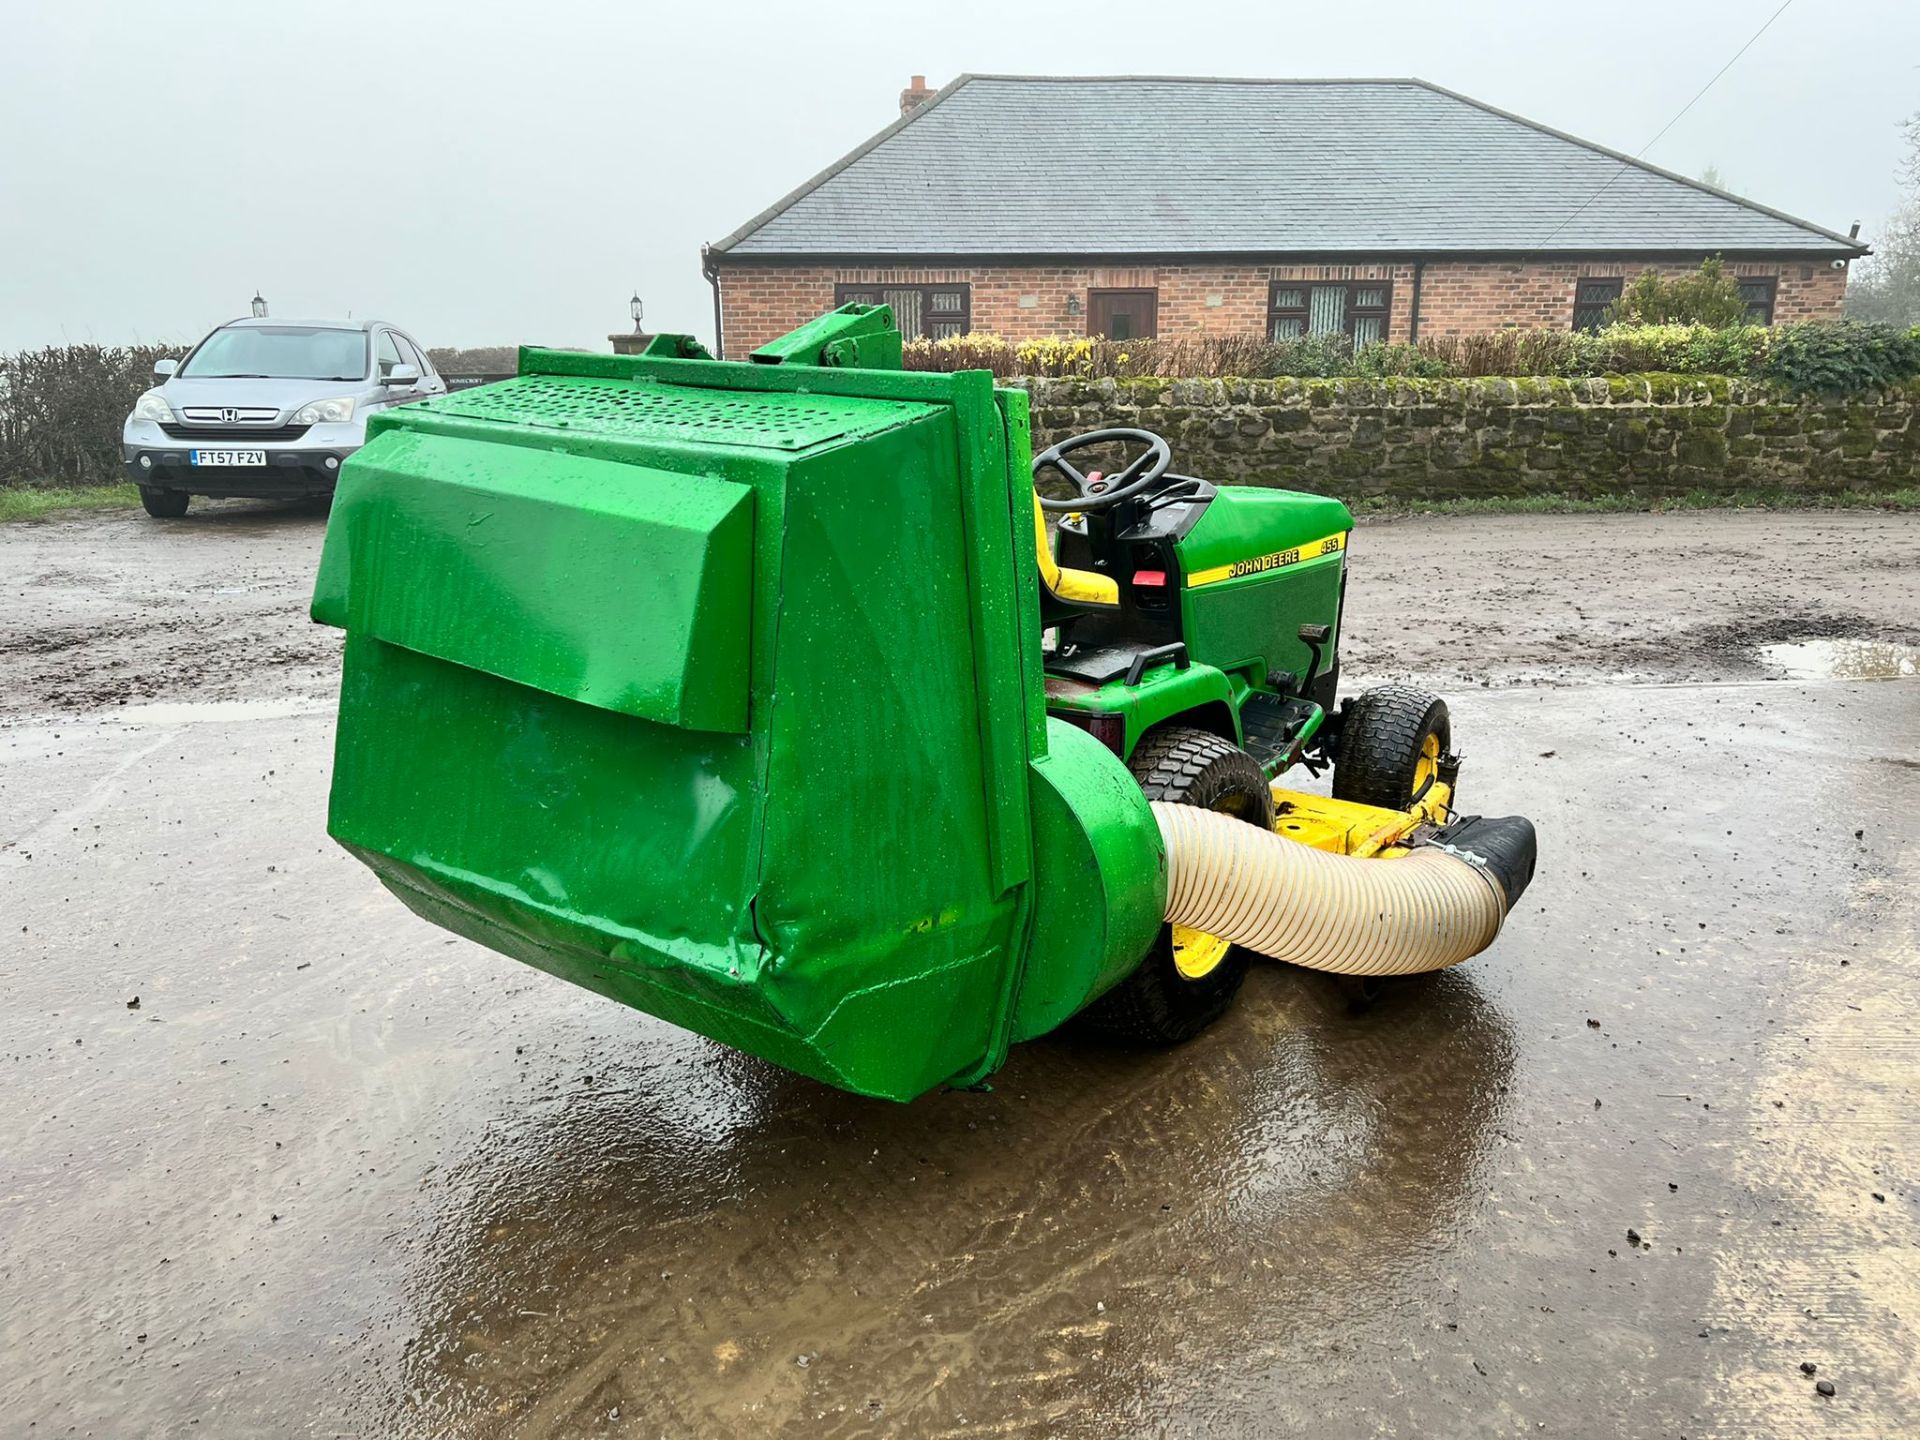 JOHN DEERE 455 22hp DIESEL RIDE ON MOWER WITH CLAMSHELL COLLECTOR, RUNS DRIVES AND CUTS *PLUS VAT* - Image 5 of 11